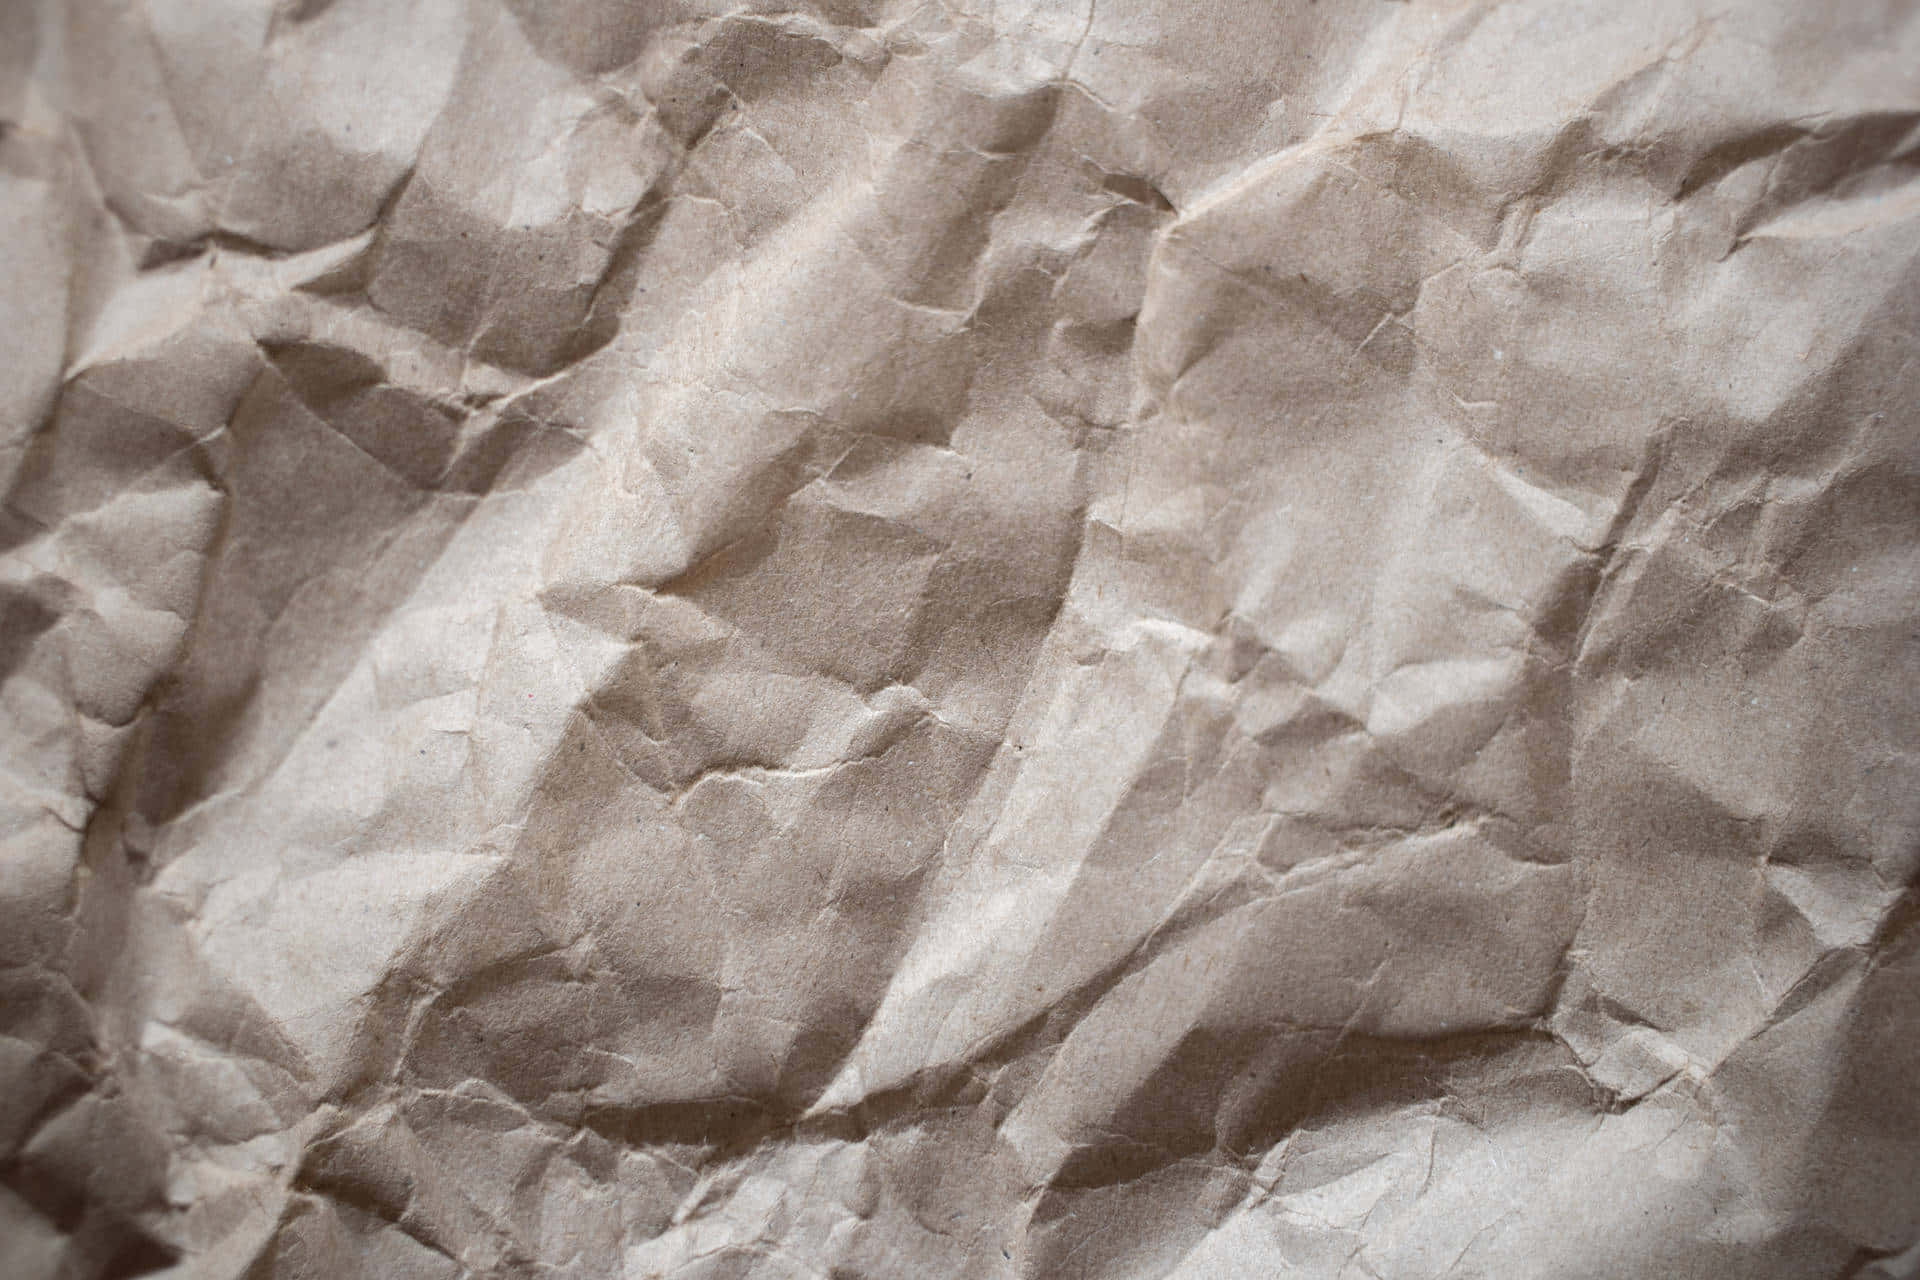 A Brown Paper Background